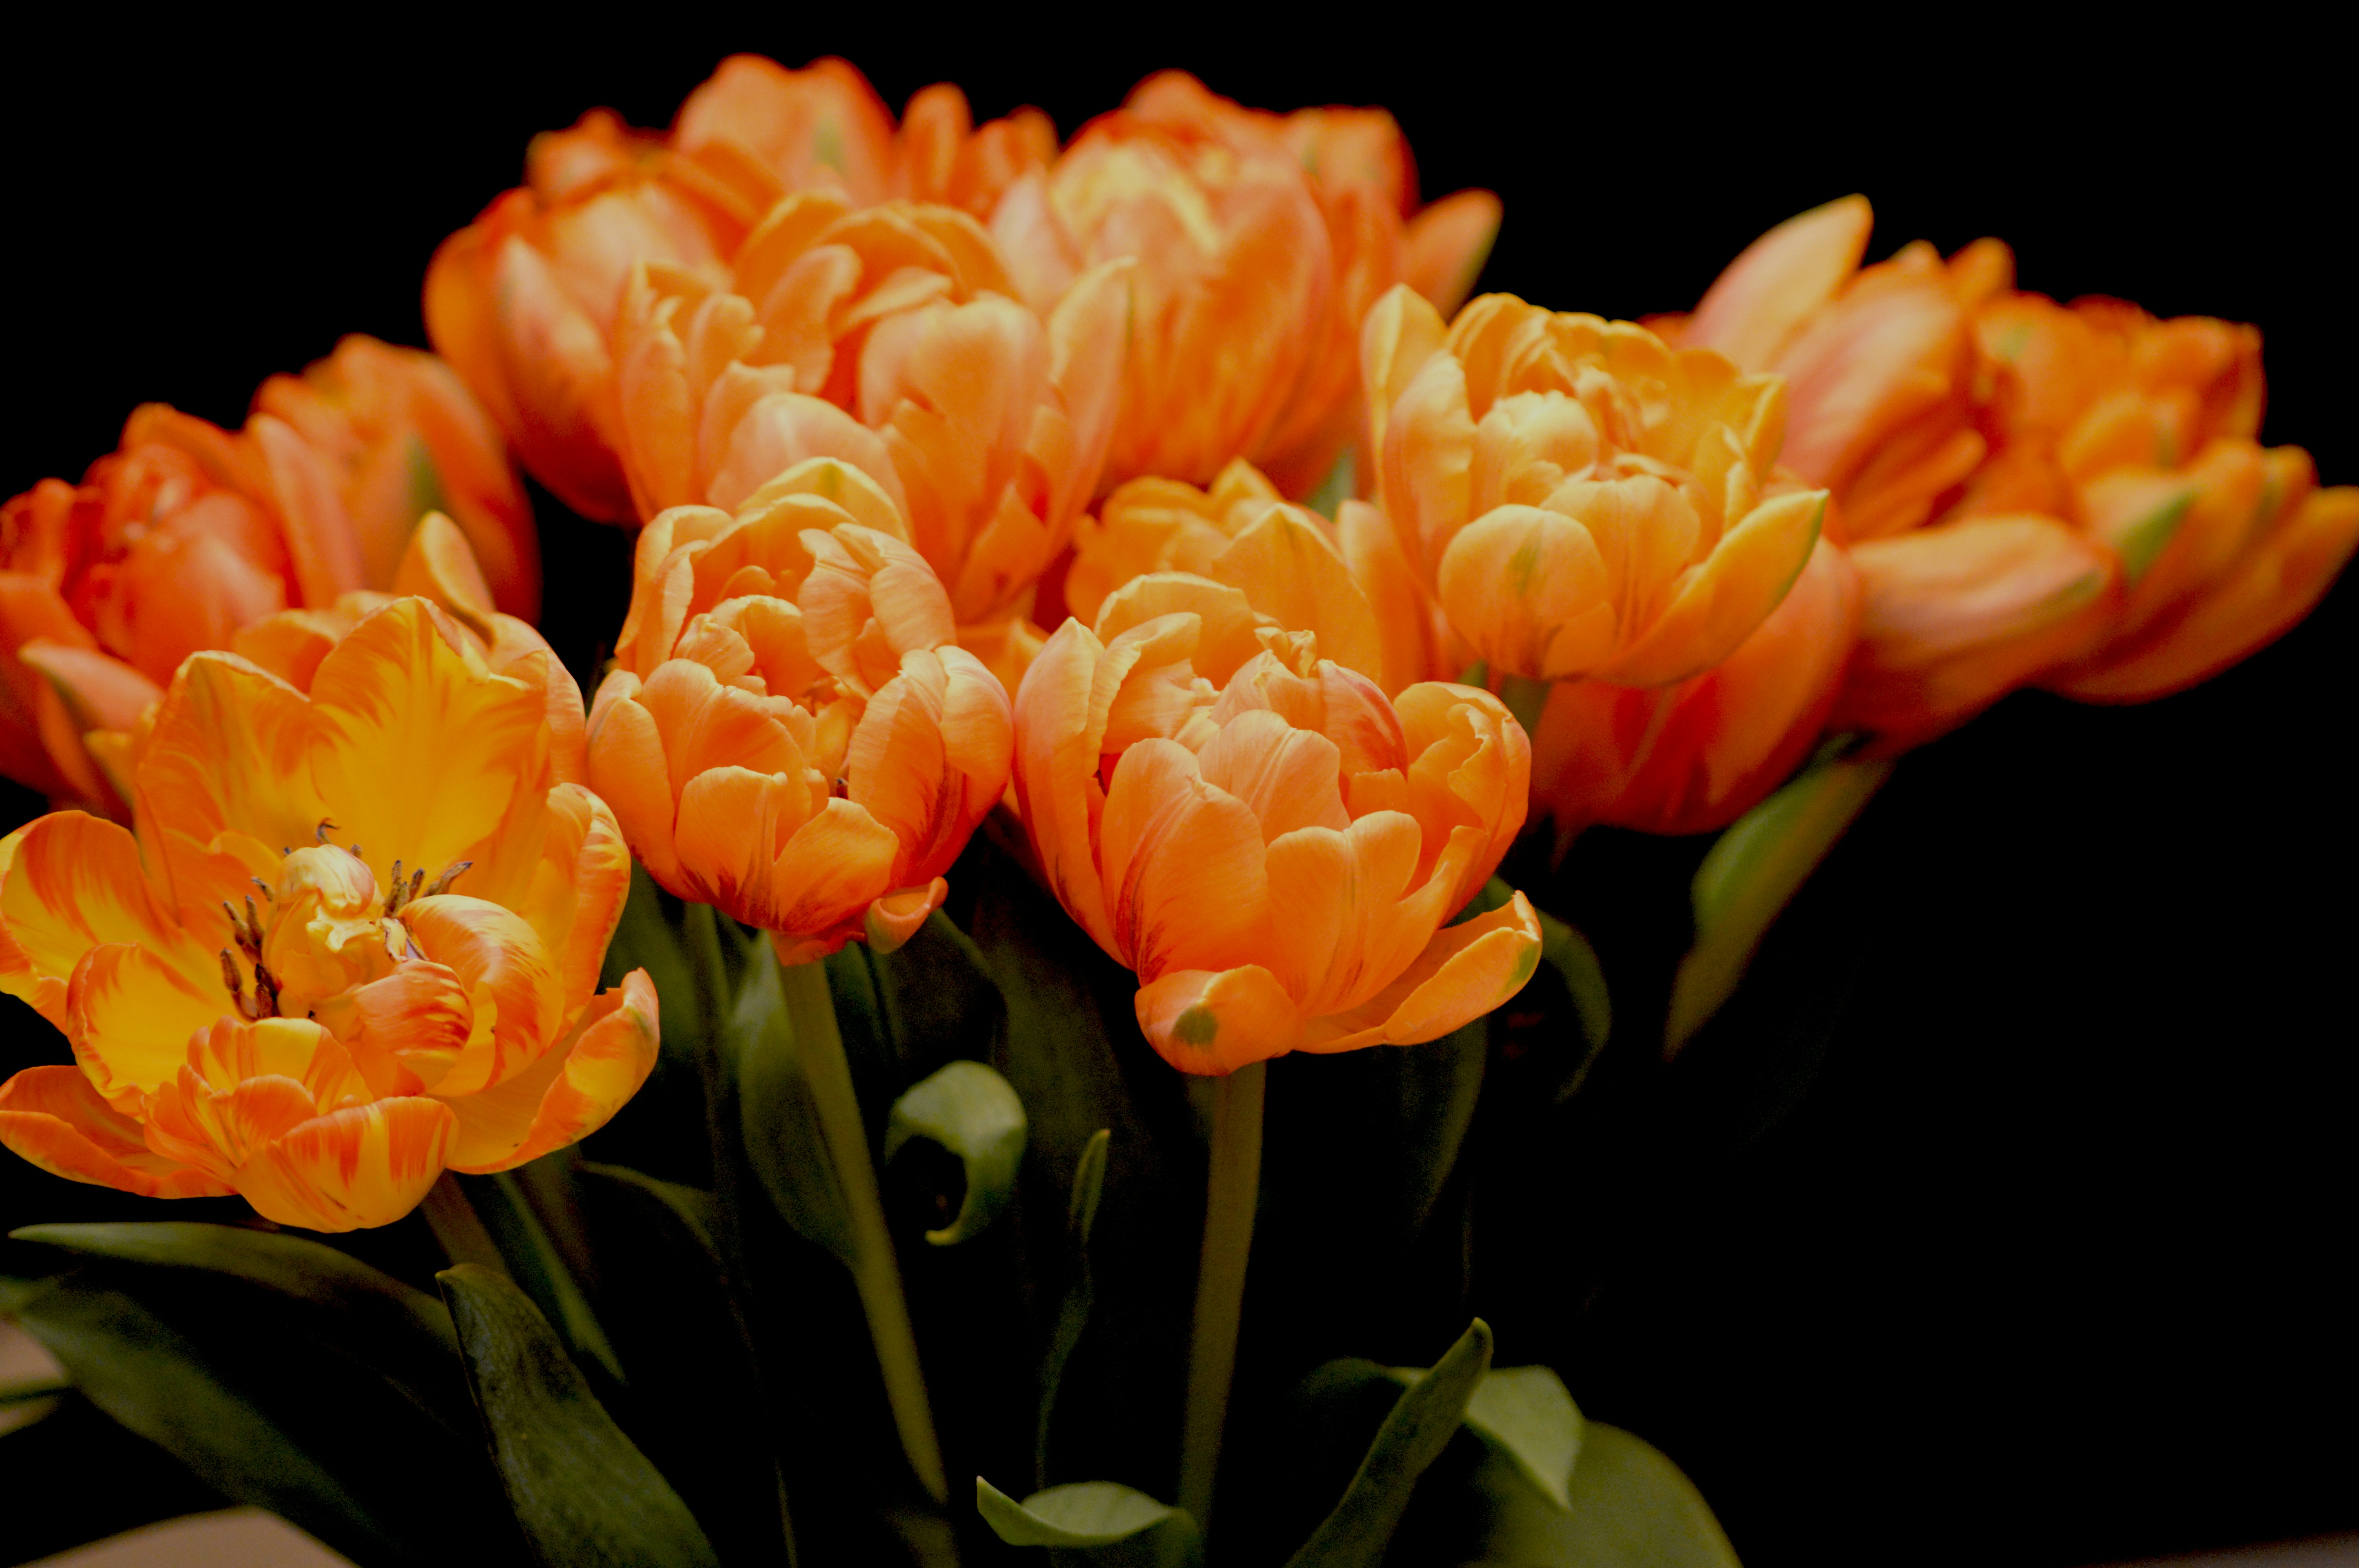 These tulips in a vase were pretty during the day however were transformed in the evening when spotlight by a single light above the table. The petals do seem to be actually glowing against the dark background. It took several shots playing with exposure and focus before getting a balance I was happy with.